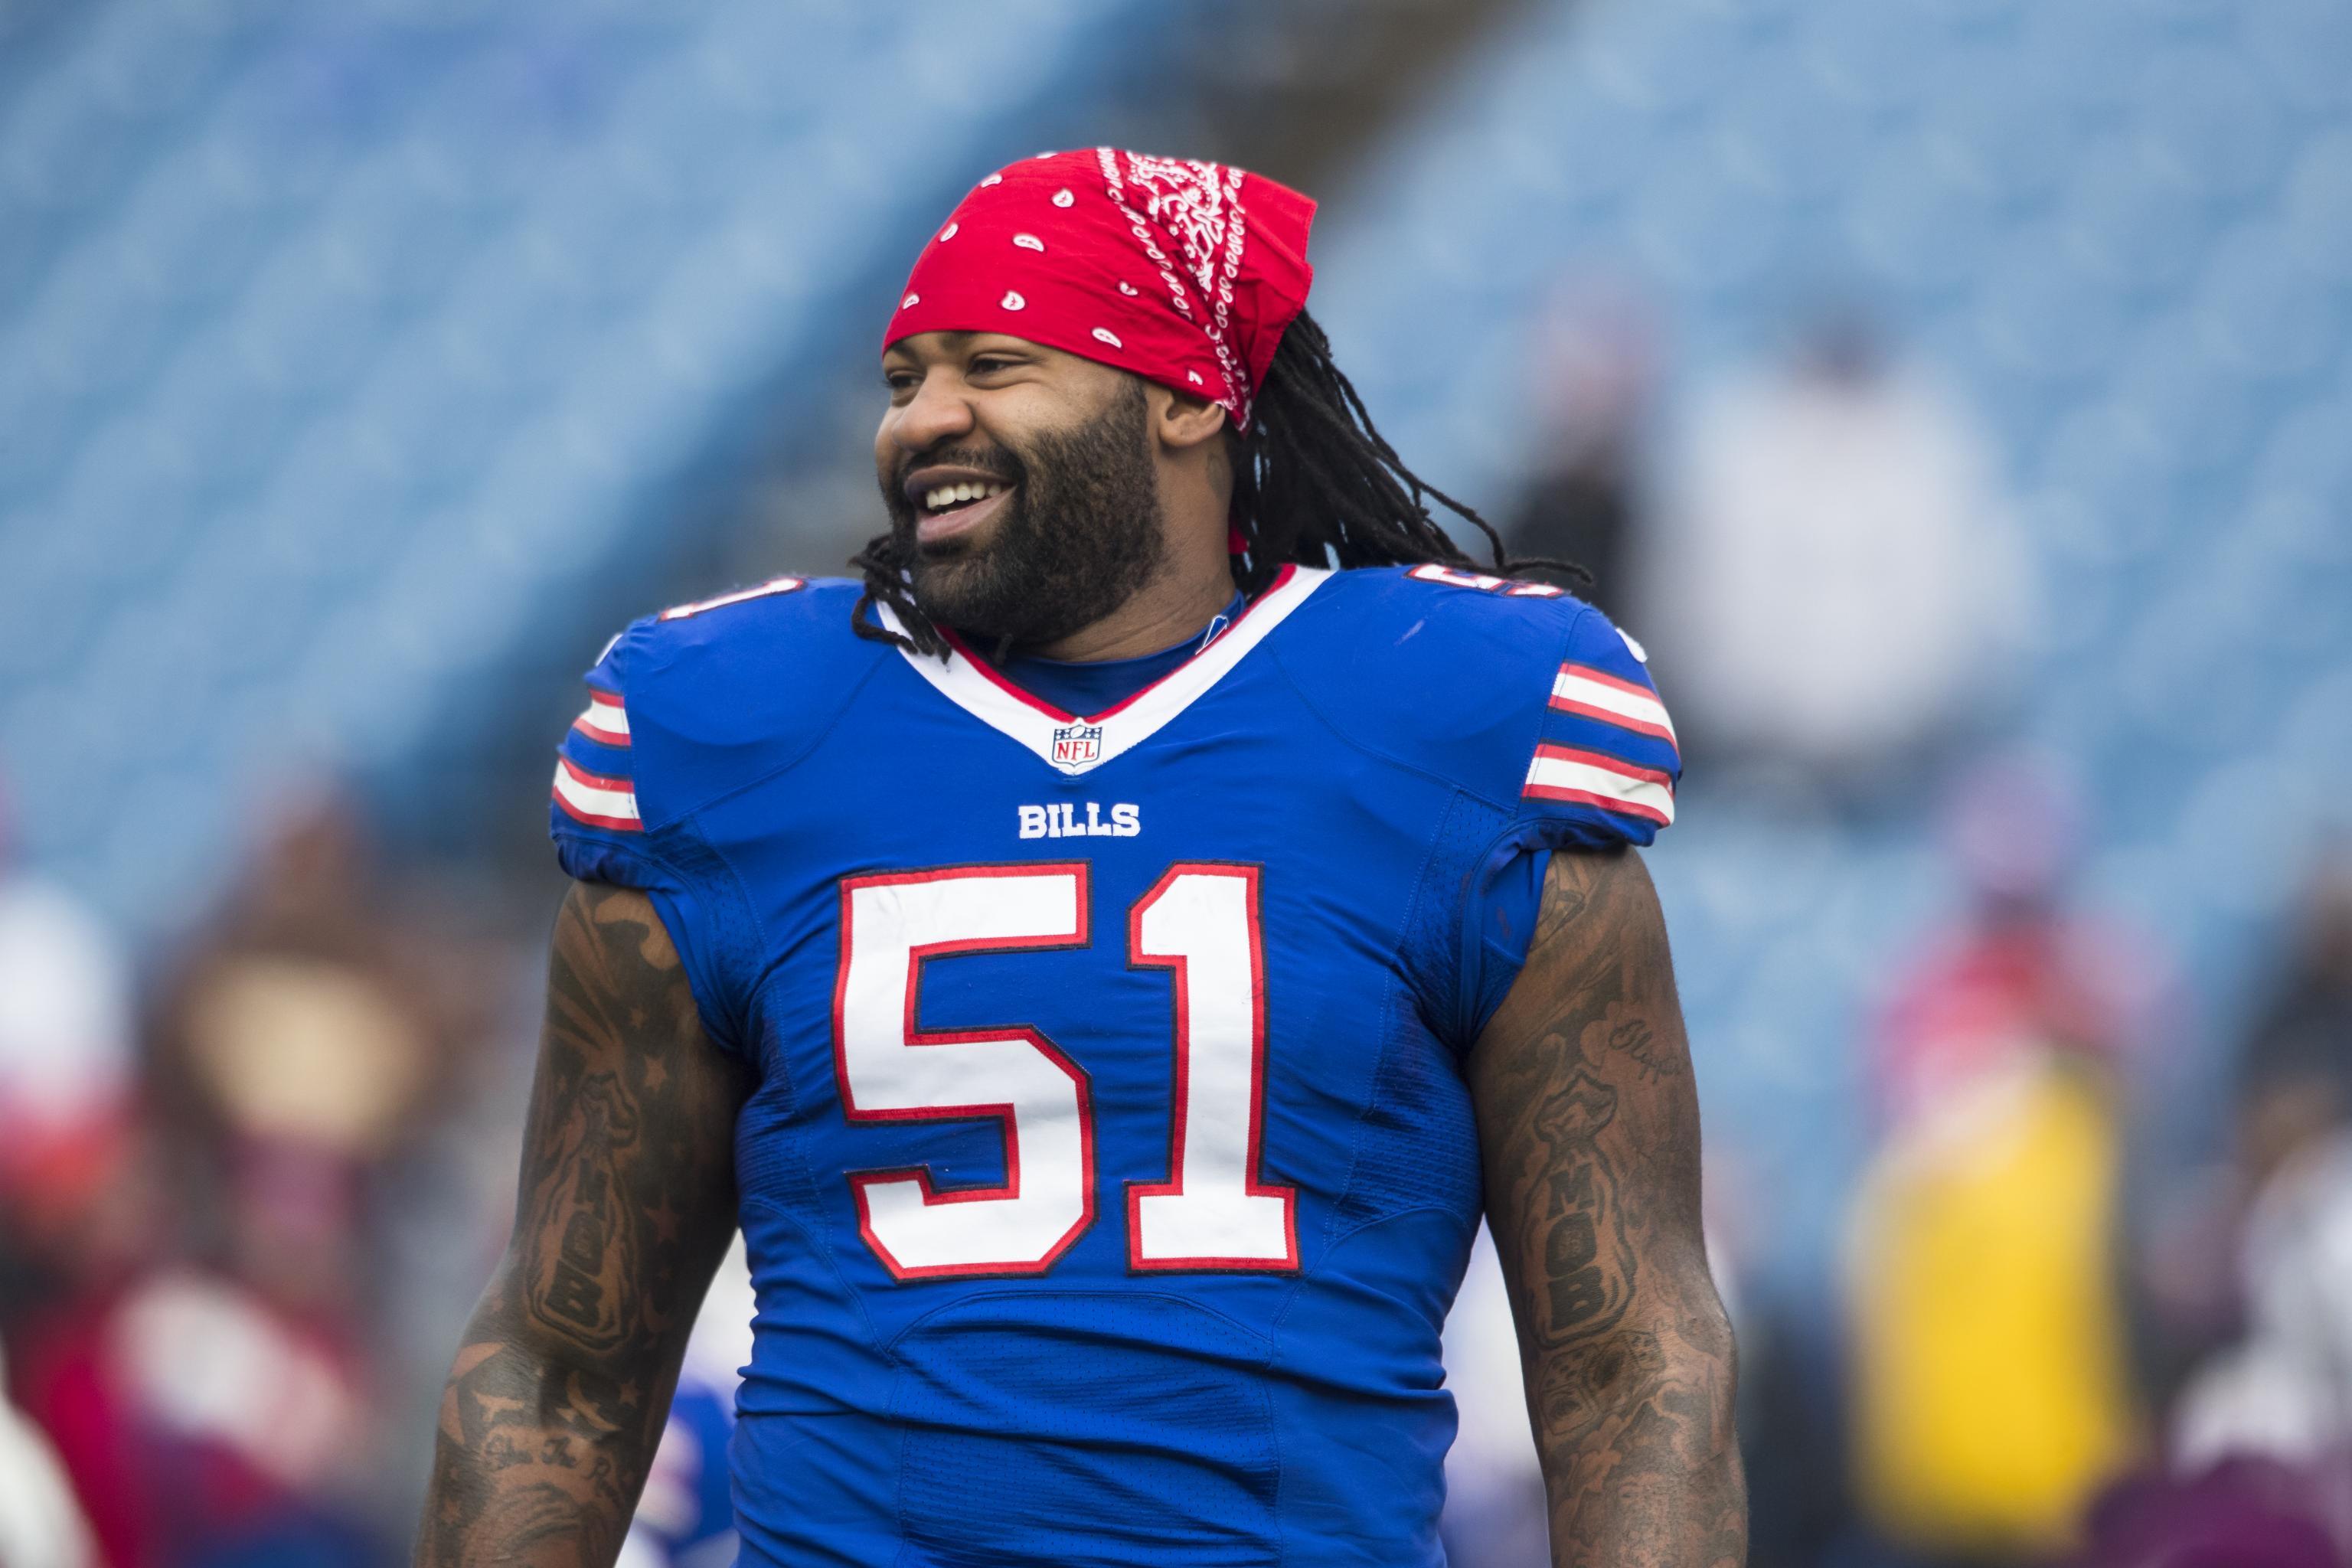 Brandon Spikes Was Sued Over Payment for Transportation of Fish